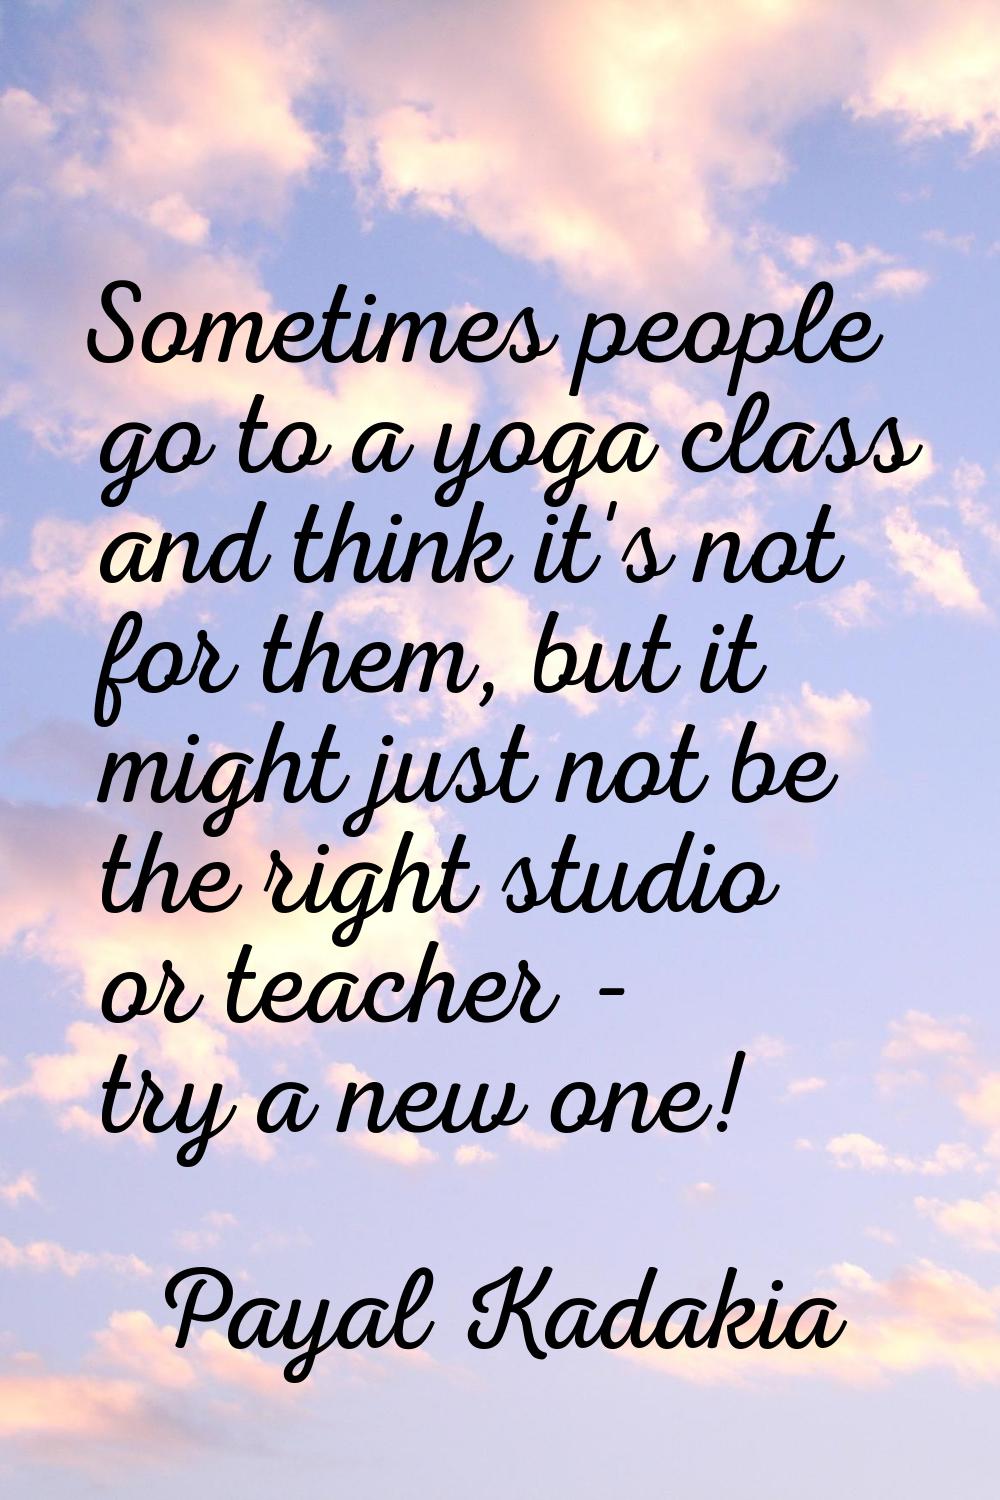 Sometimes people go to a yoga class and think it's not for them, but it might just not be the right